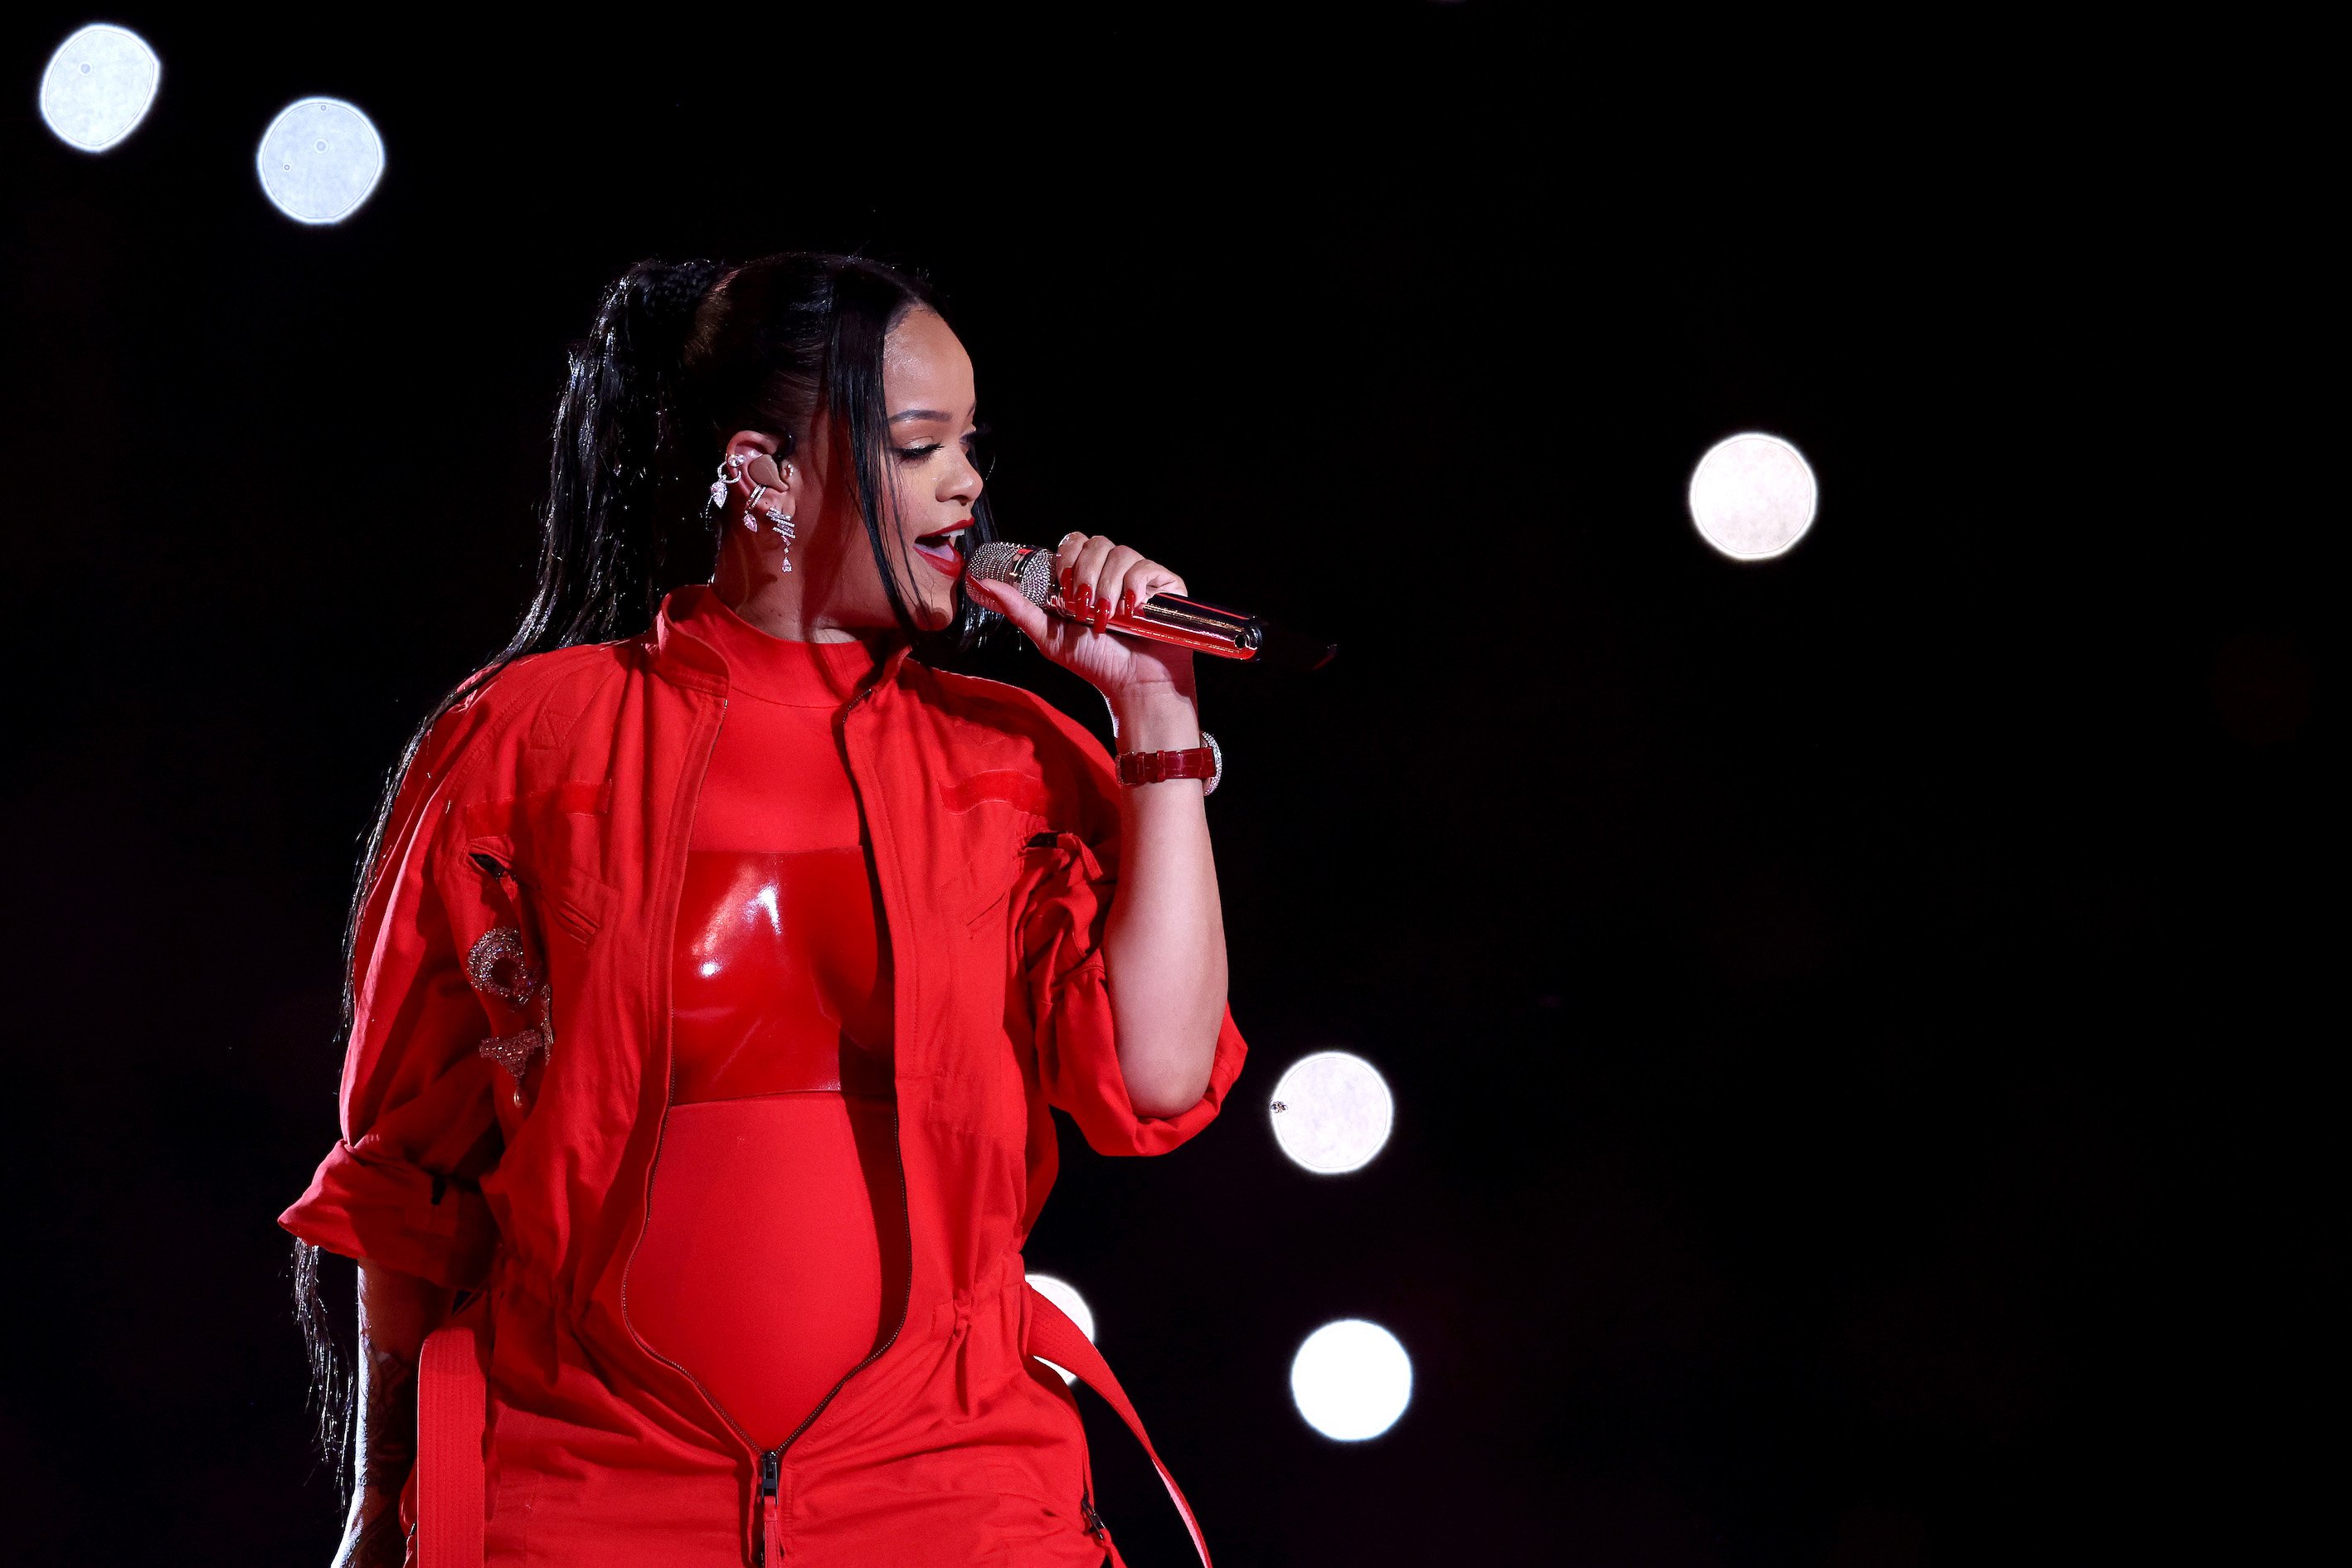 Rihanna performs during the Super Bowl LVII Halftime Show at State Farm Stadium in Glendale, Arizona